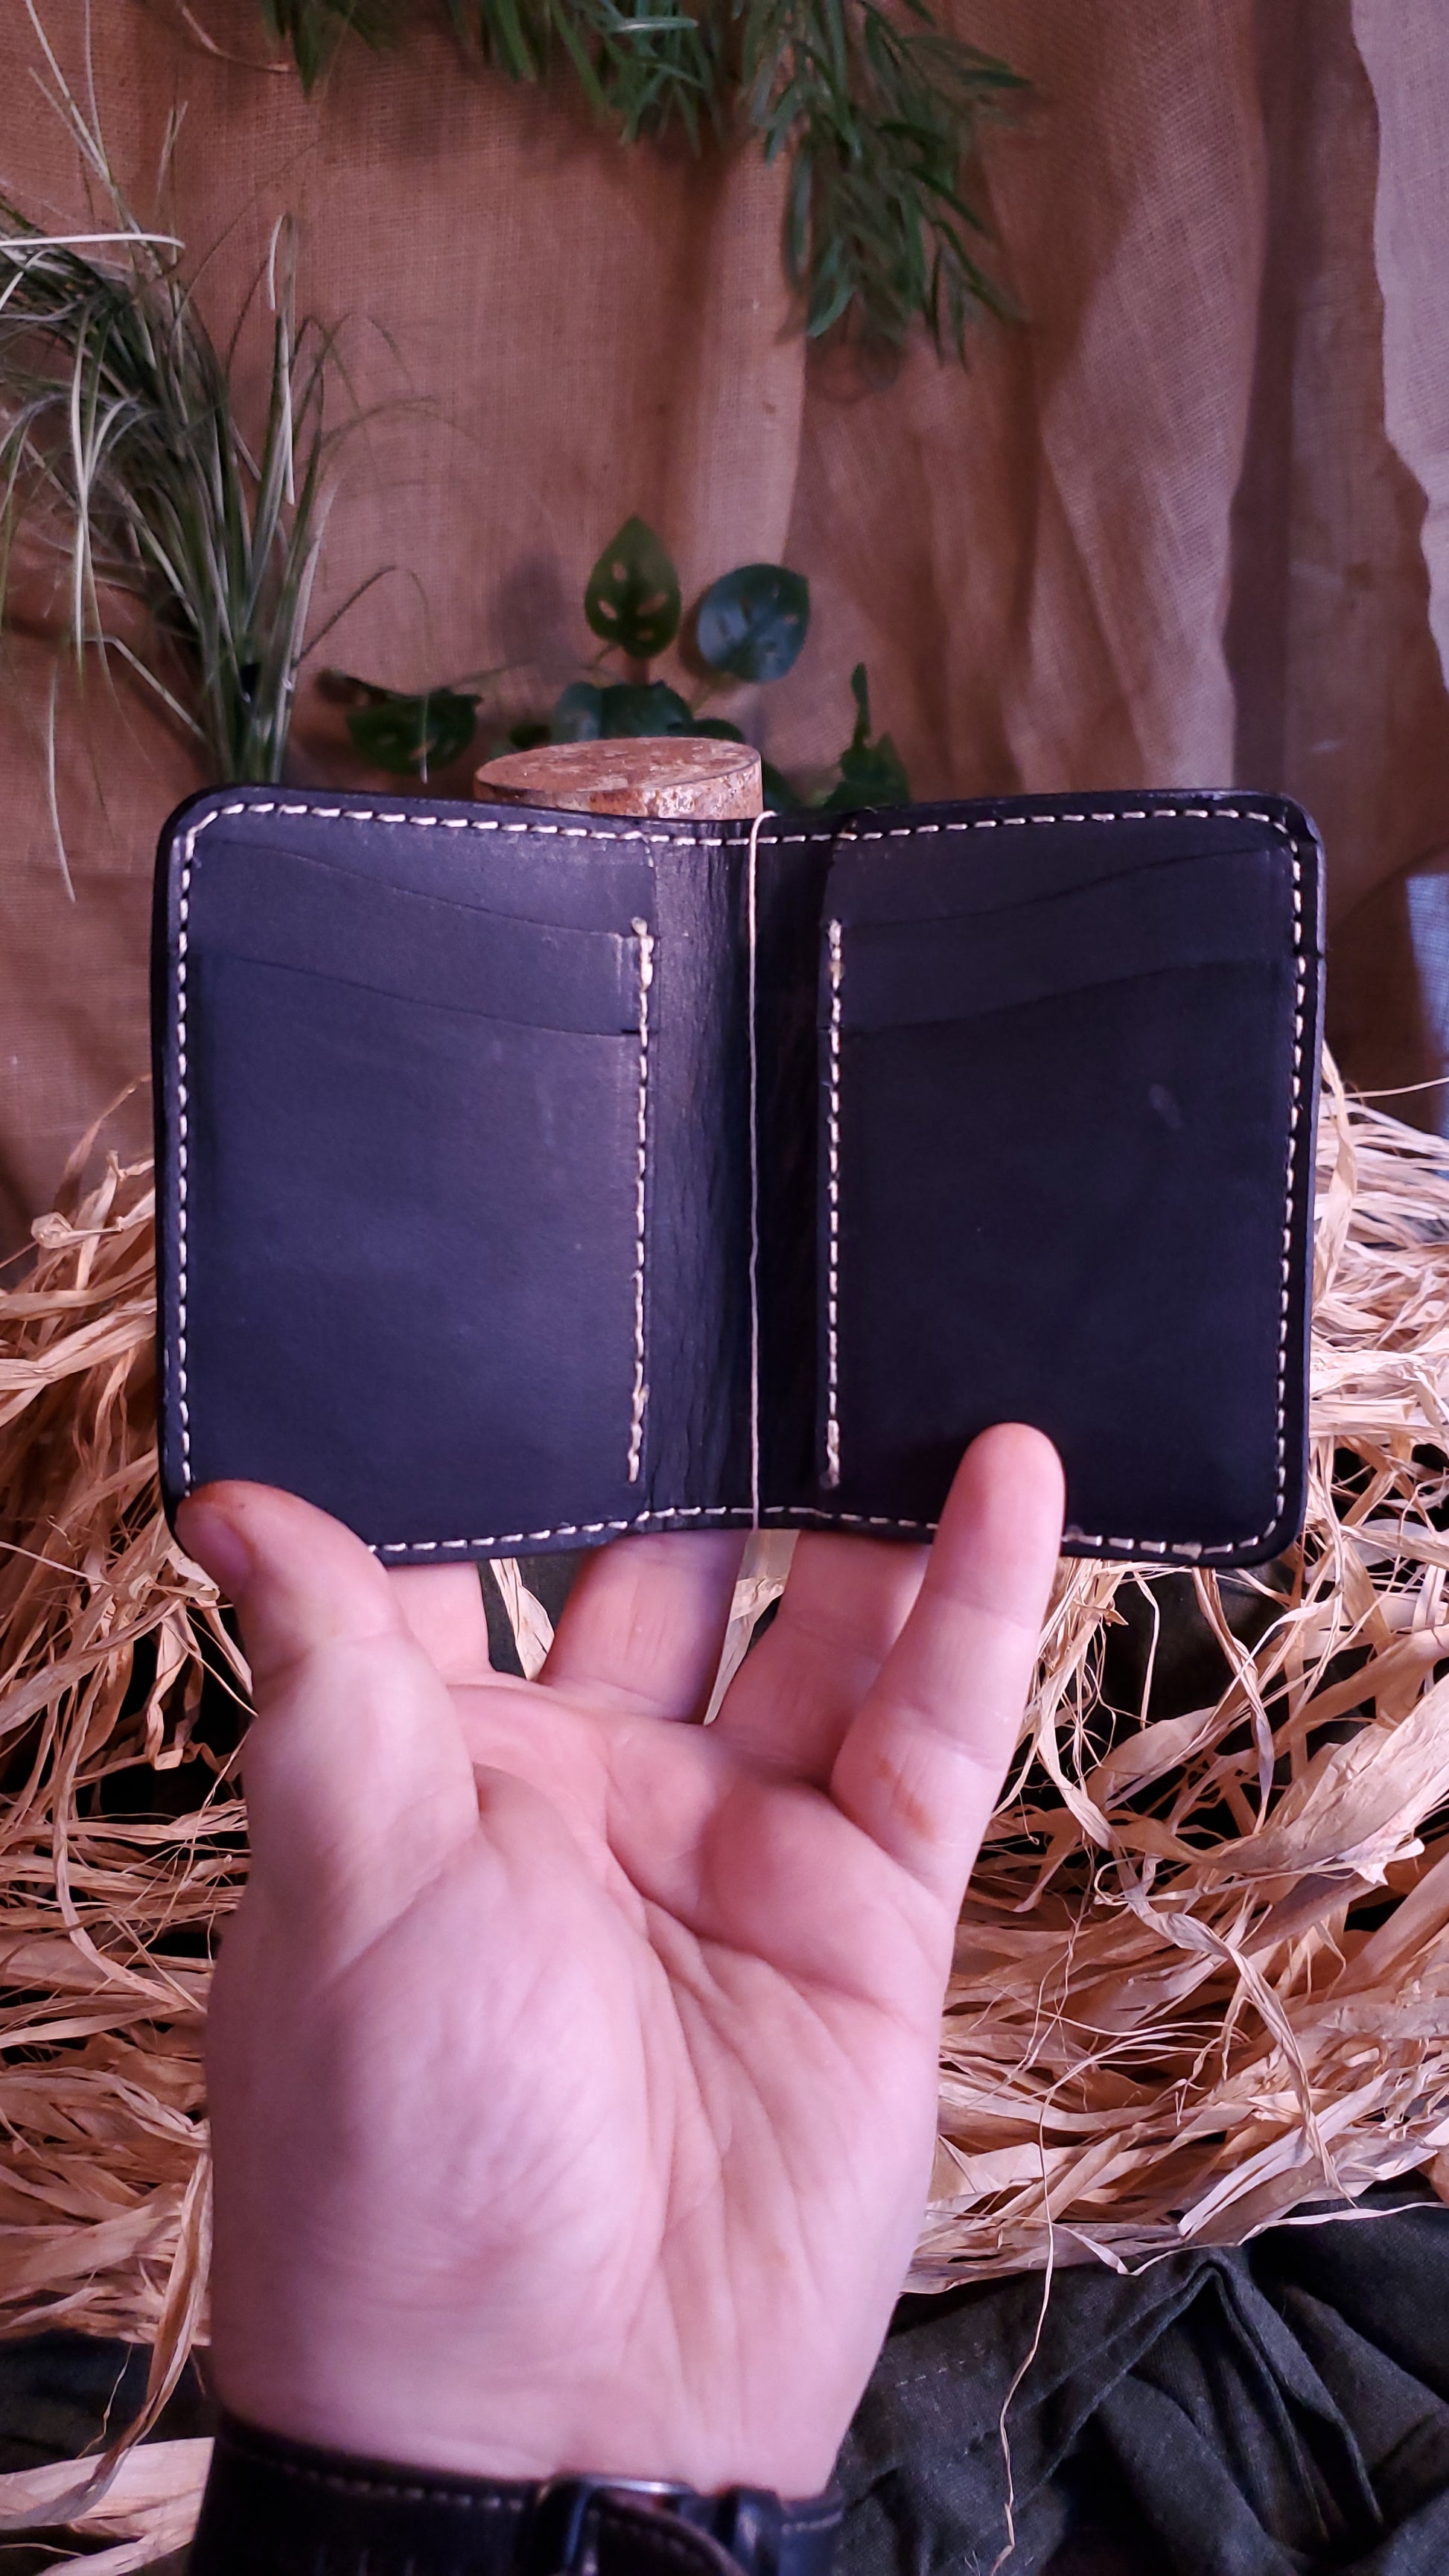 Interior of the Bi-fold style wallet, featuring 4 card slots, 2 on each side, as well as 2 hidden pockets behind the card slots, 1 on each side